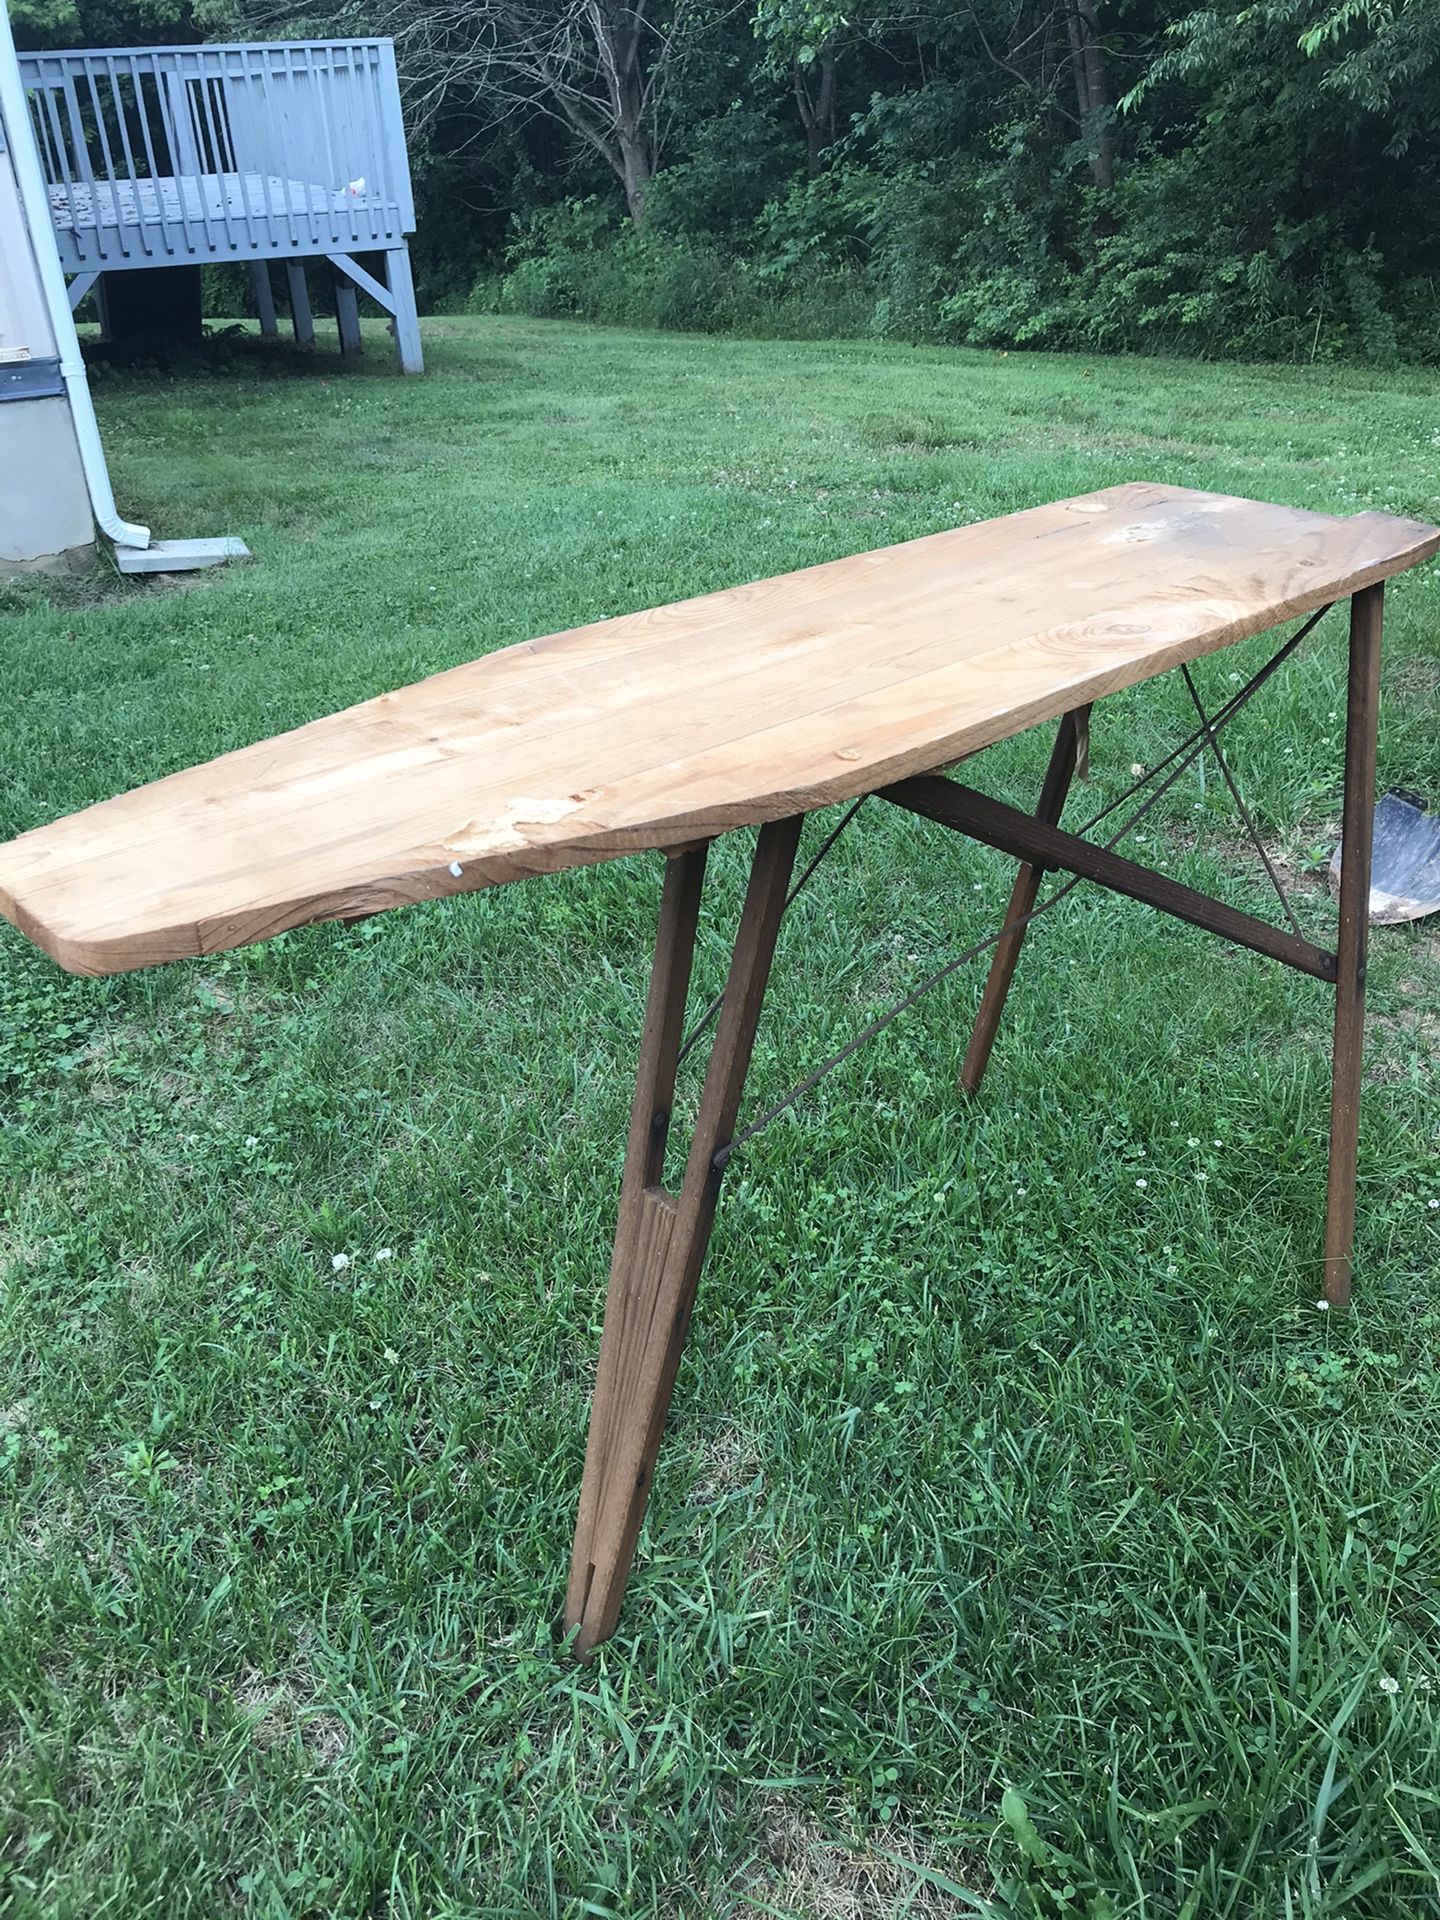 Antique wooden ironing board by Madison Mill & Lumber Co